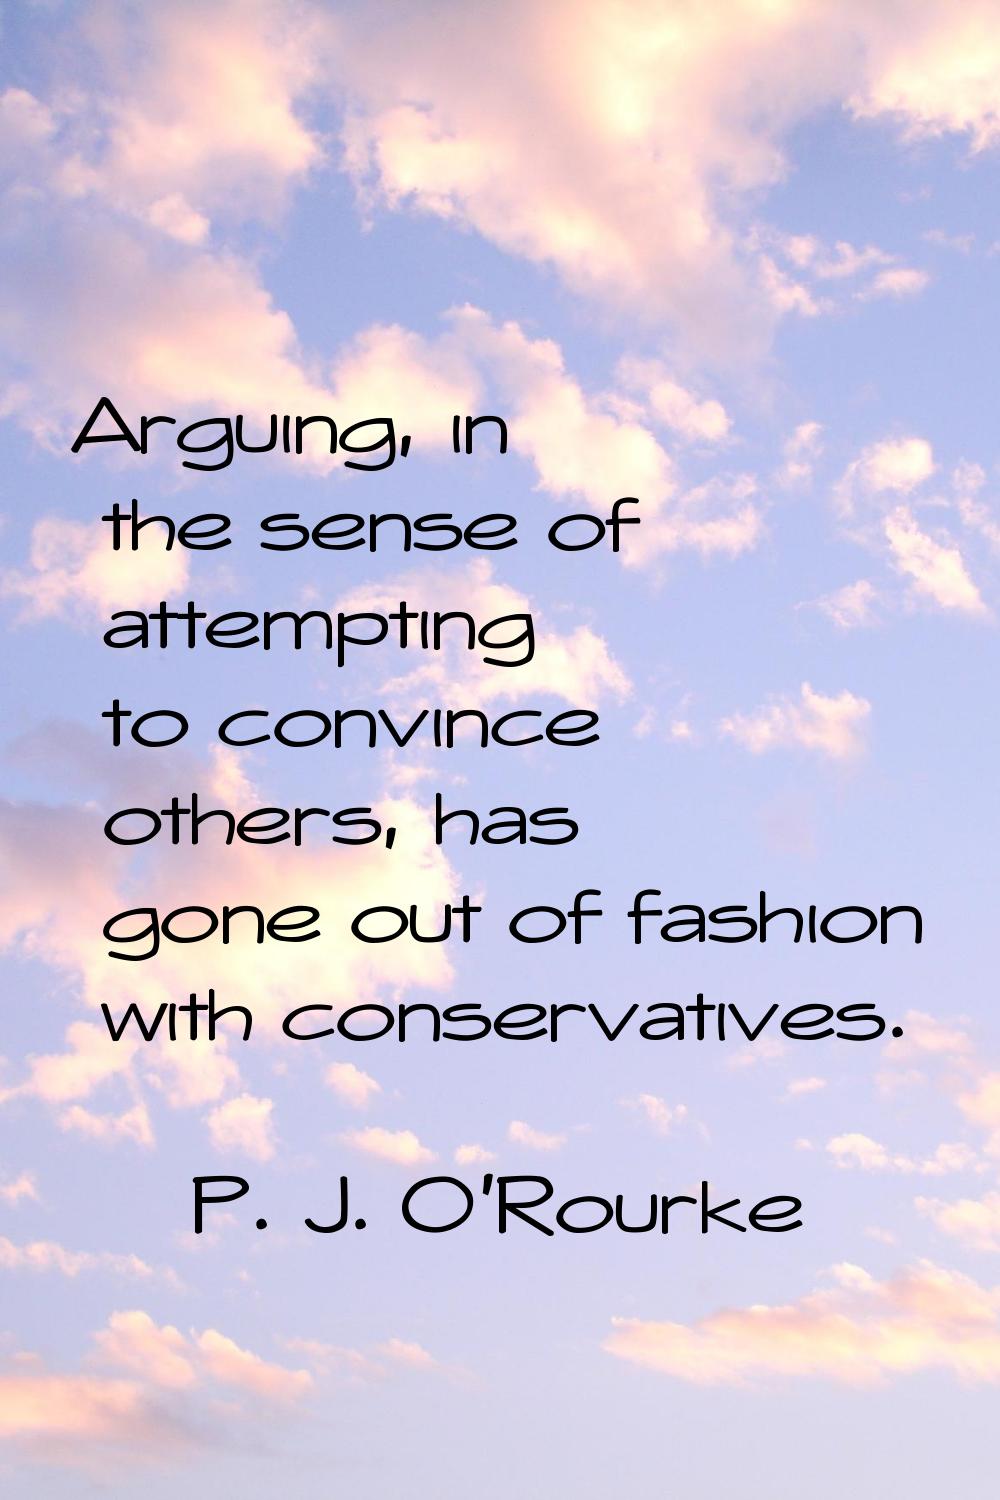 Arguing, in the sense of attempting to convince others, has gone out of fashion with conservatives.